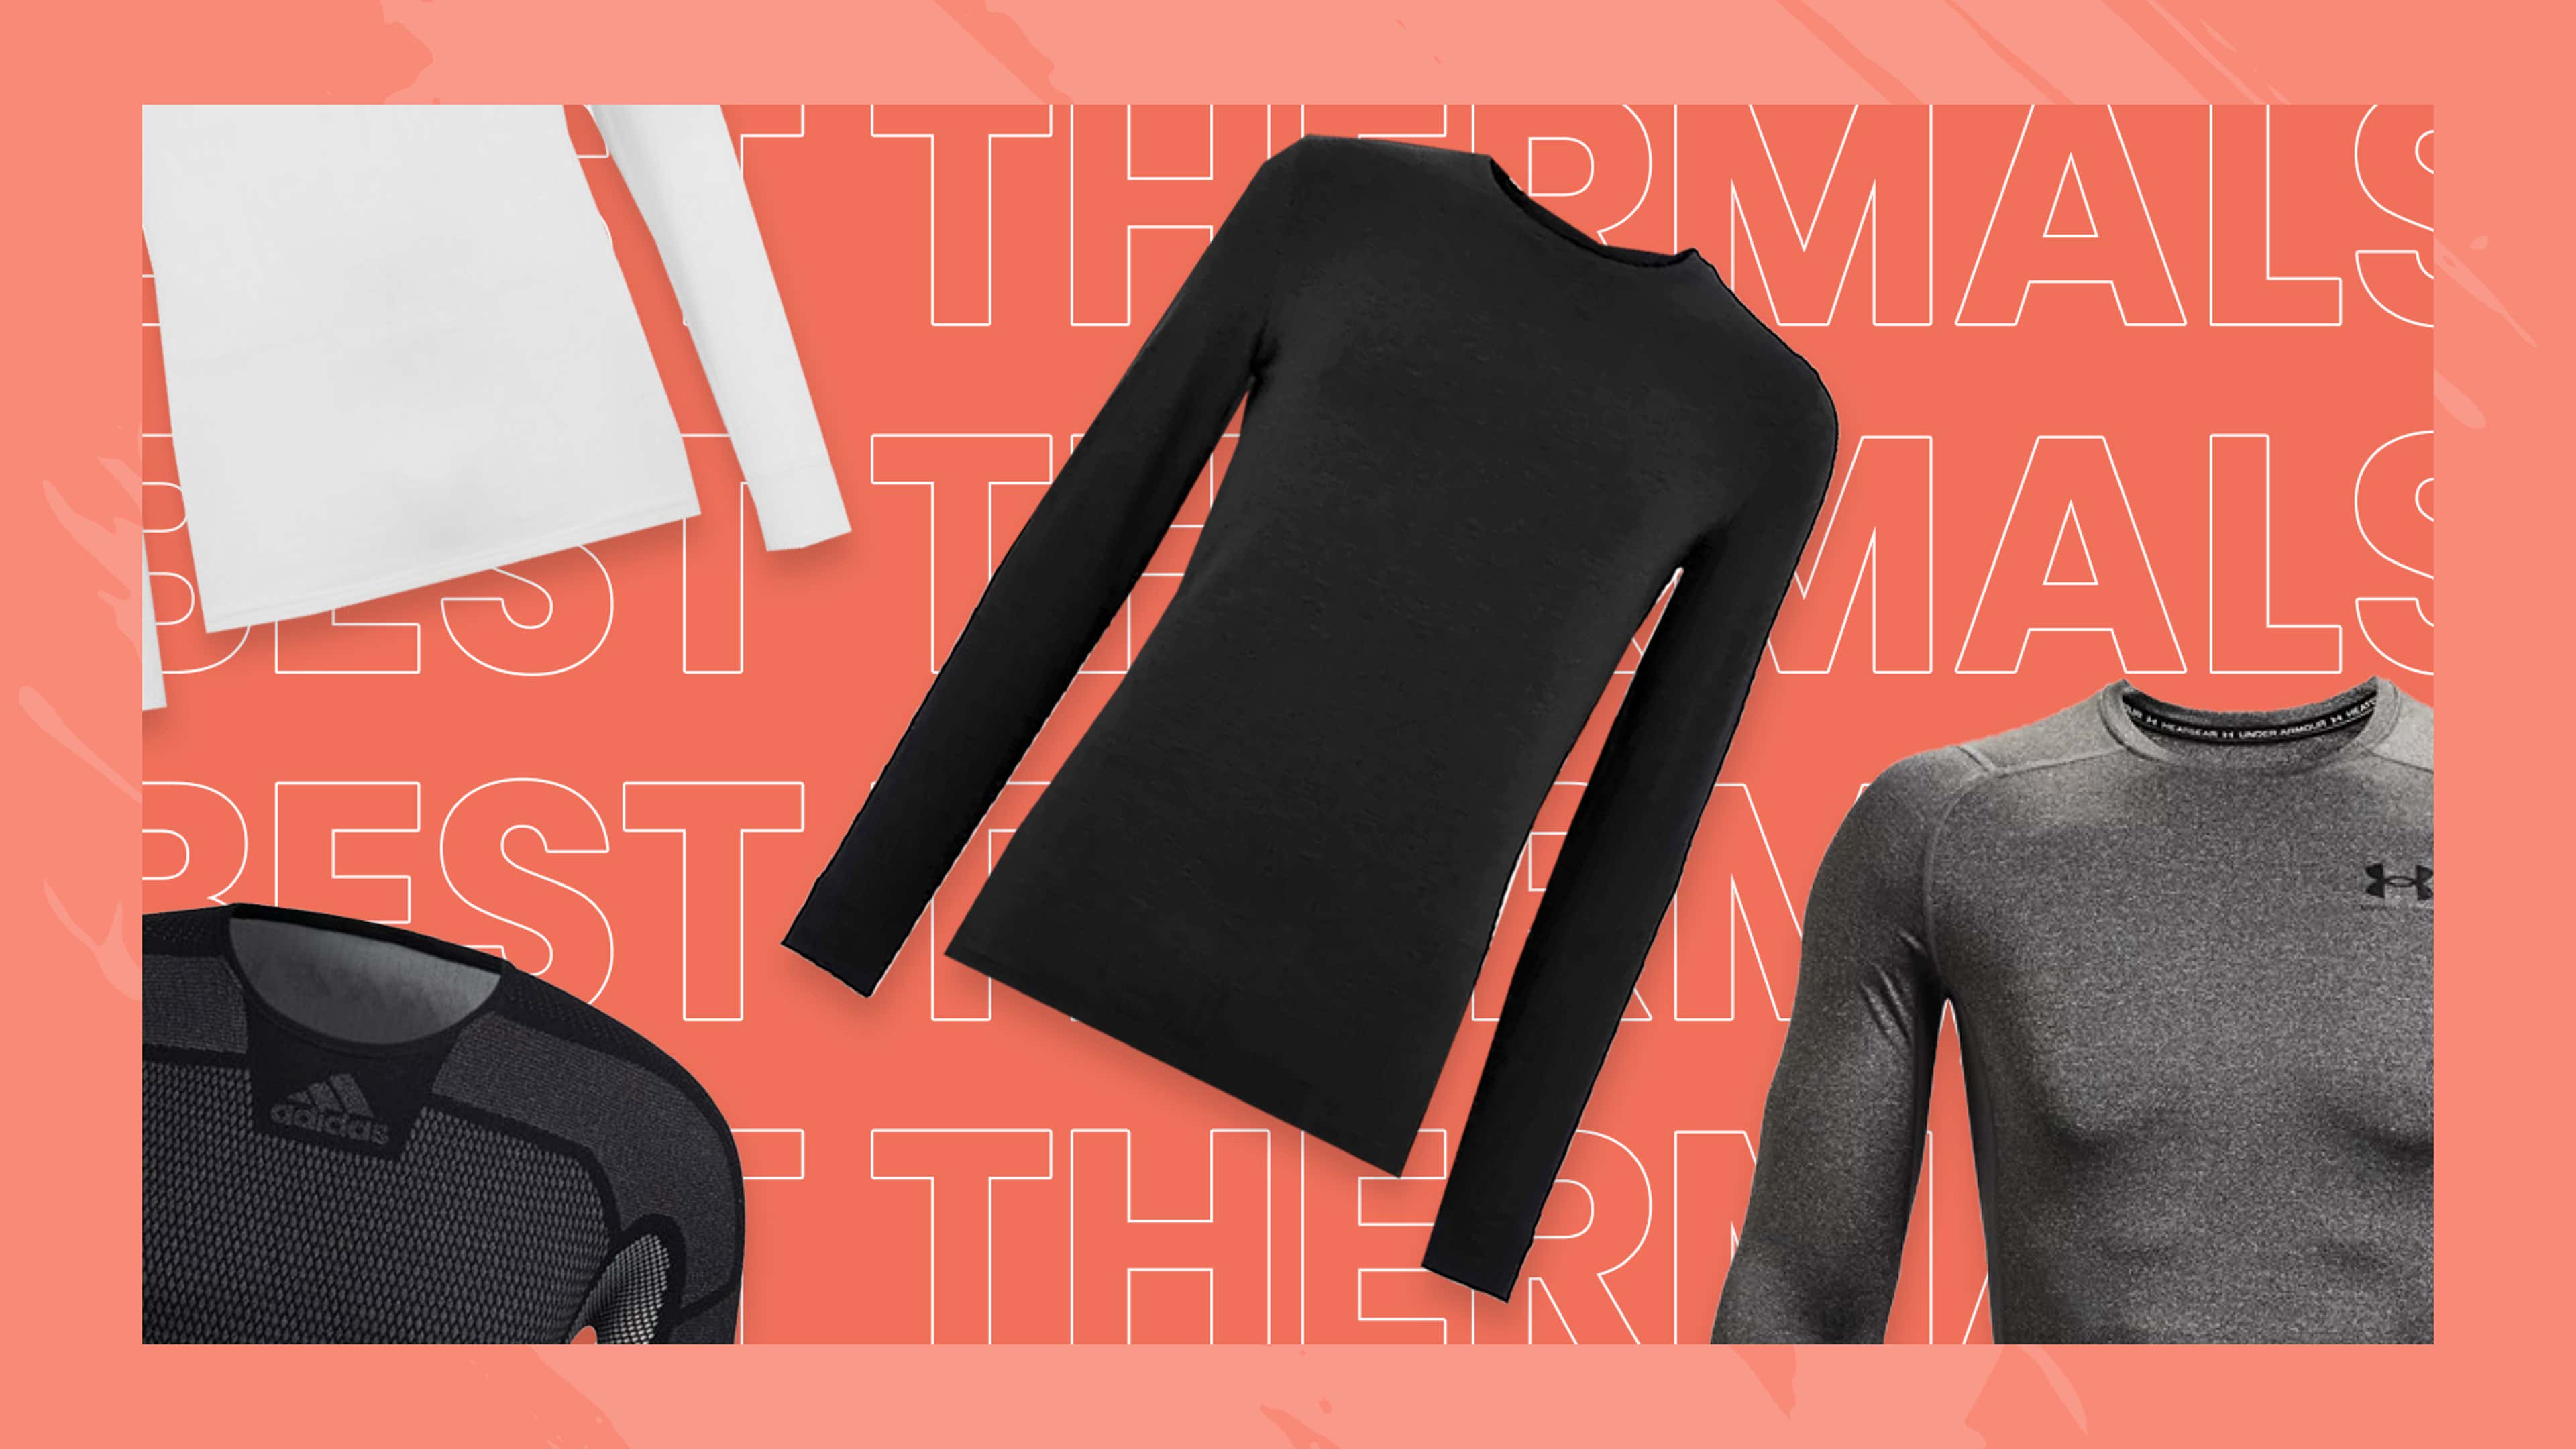 The 12 best men's thermal tops and base layers for winter